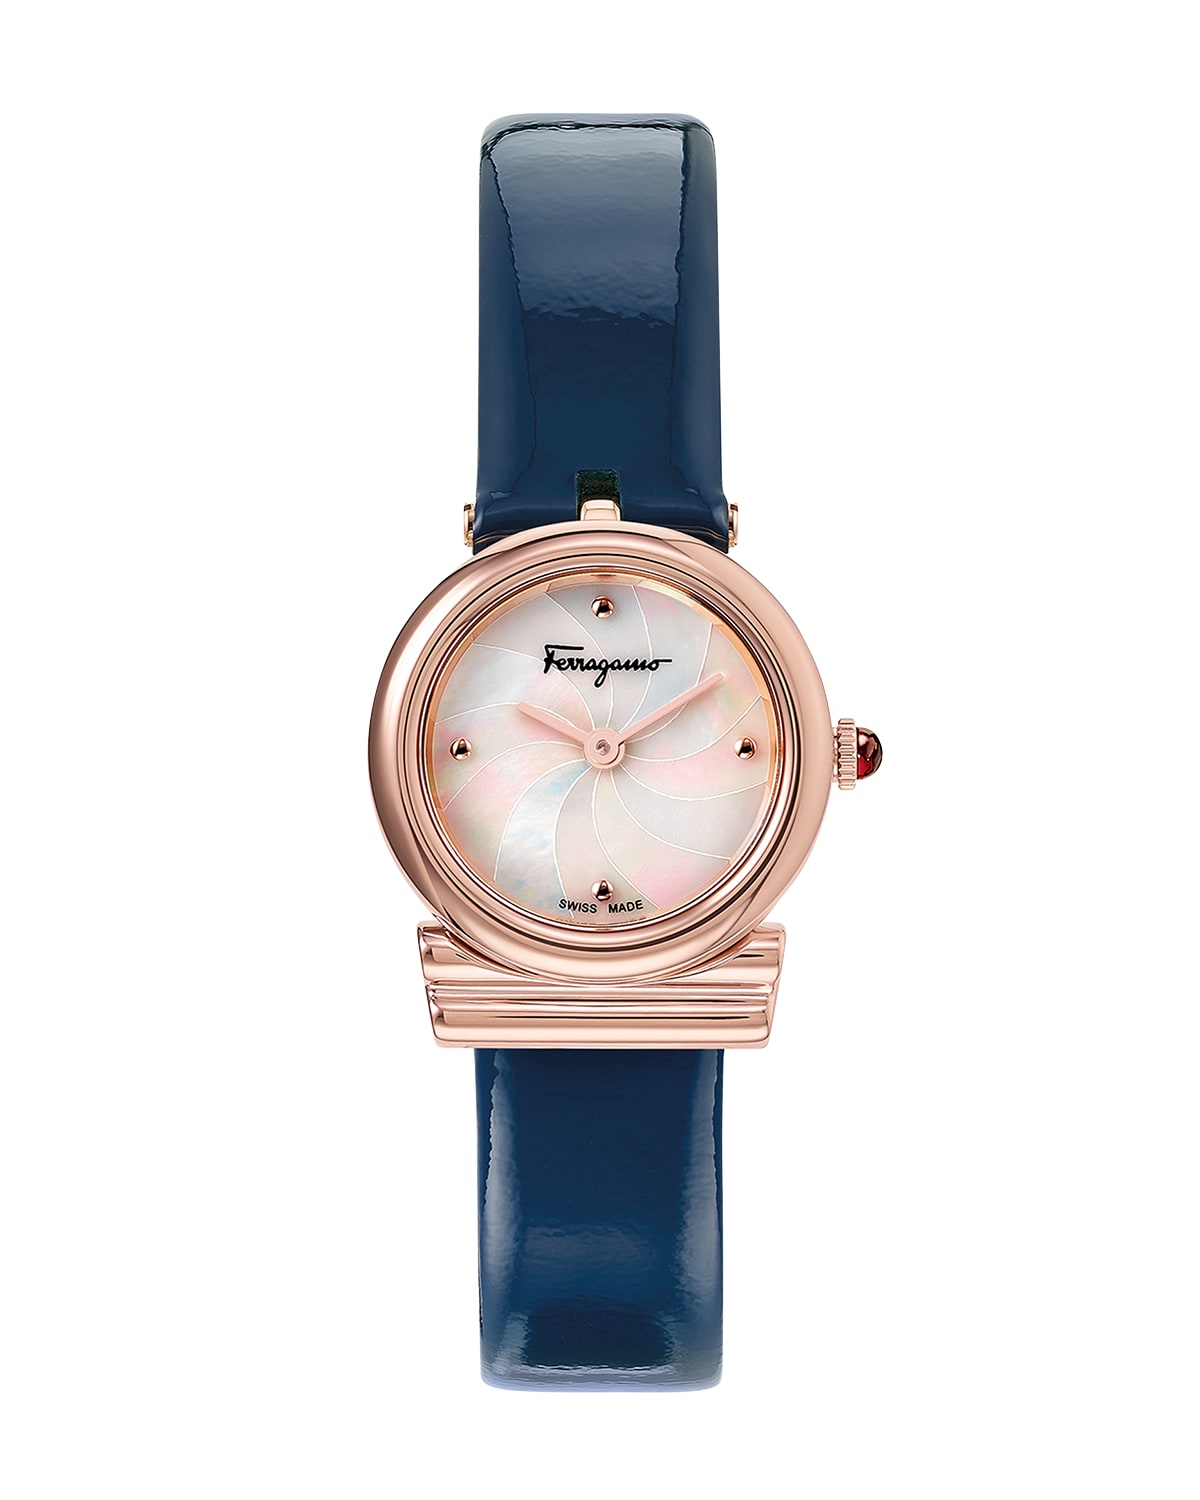 Ferragamo Gancini Stainless Steel Watch With Leather Strap, Rose Gold Ip In White/blue